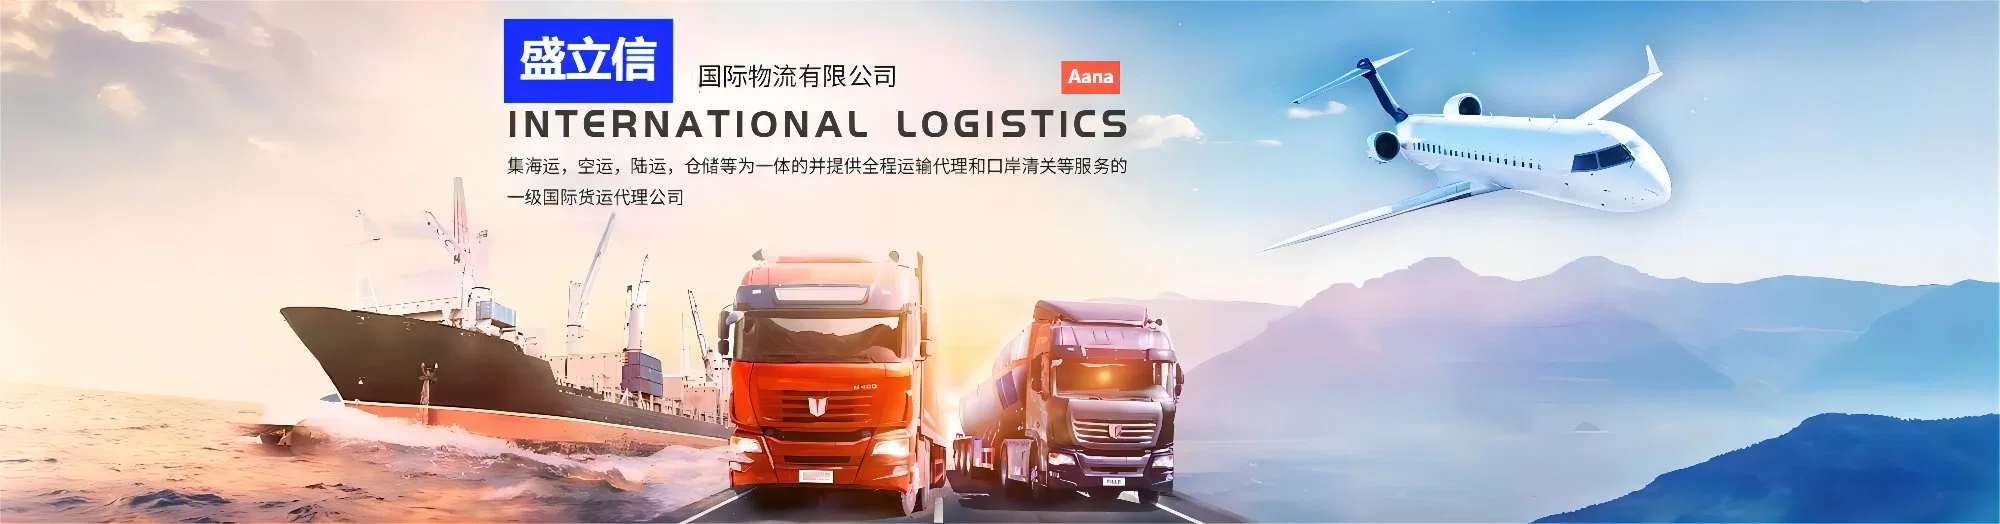 Professional Logistics Shipping From China to Worldwide, Air Freight/Sea Freight/Railway Train Freight/Express